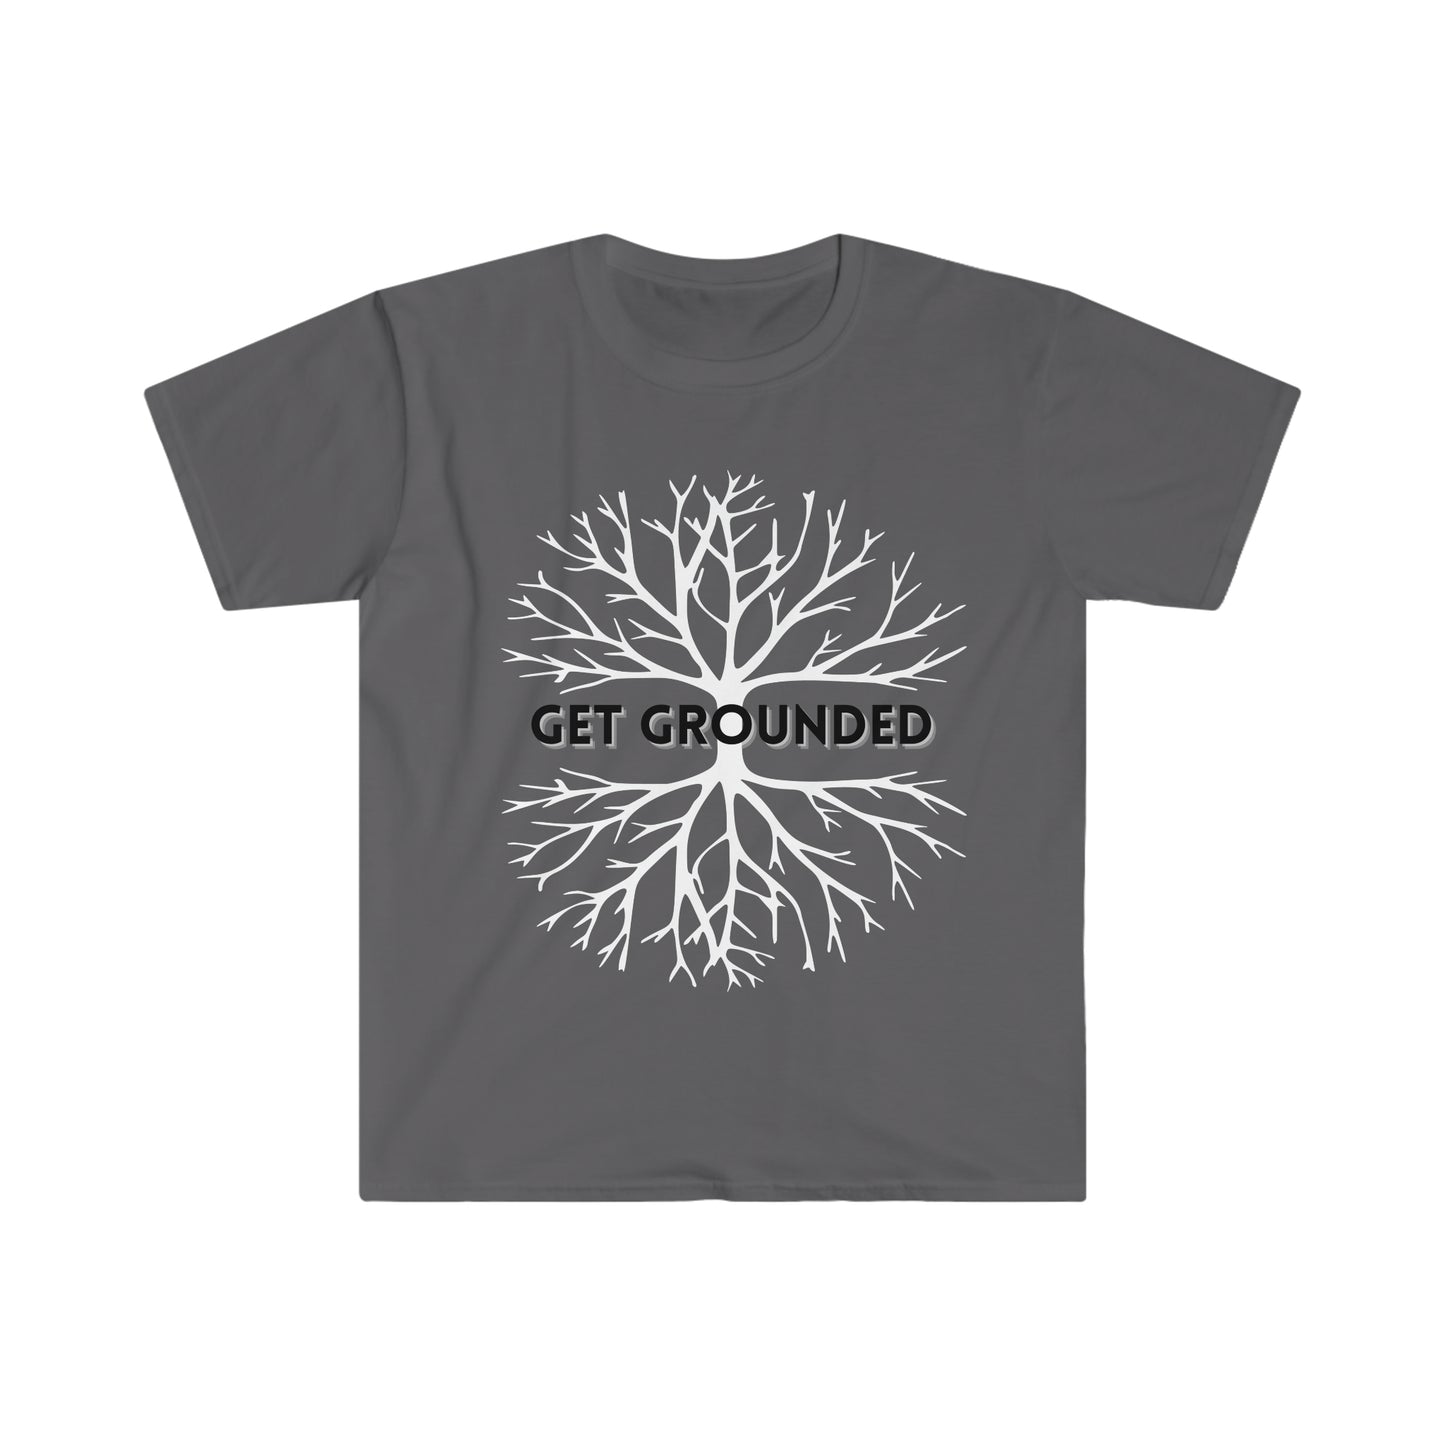 Get Grounded!  Inspirational tee. 100% soft cotton